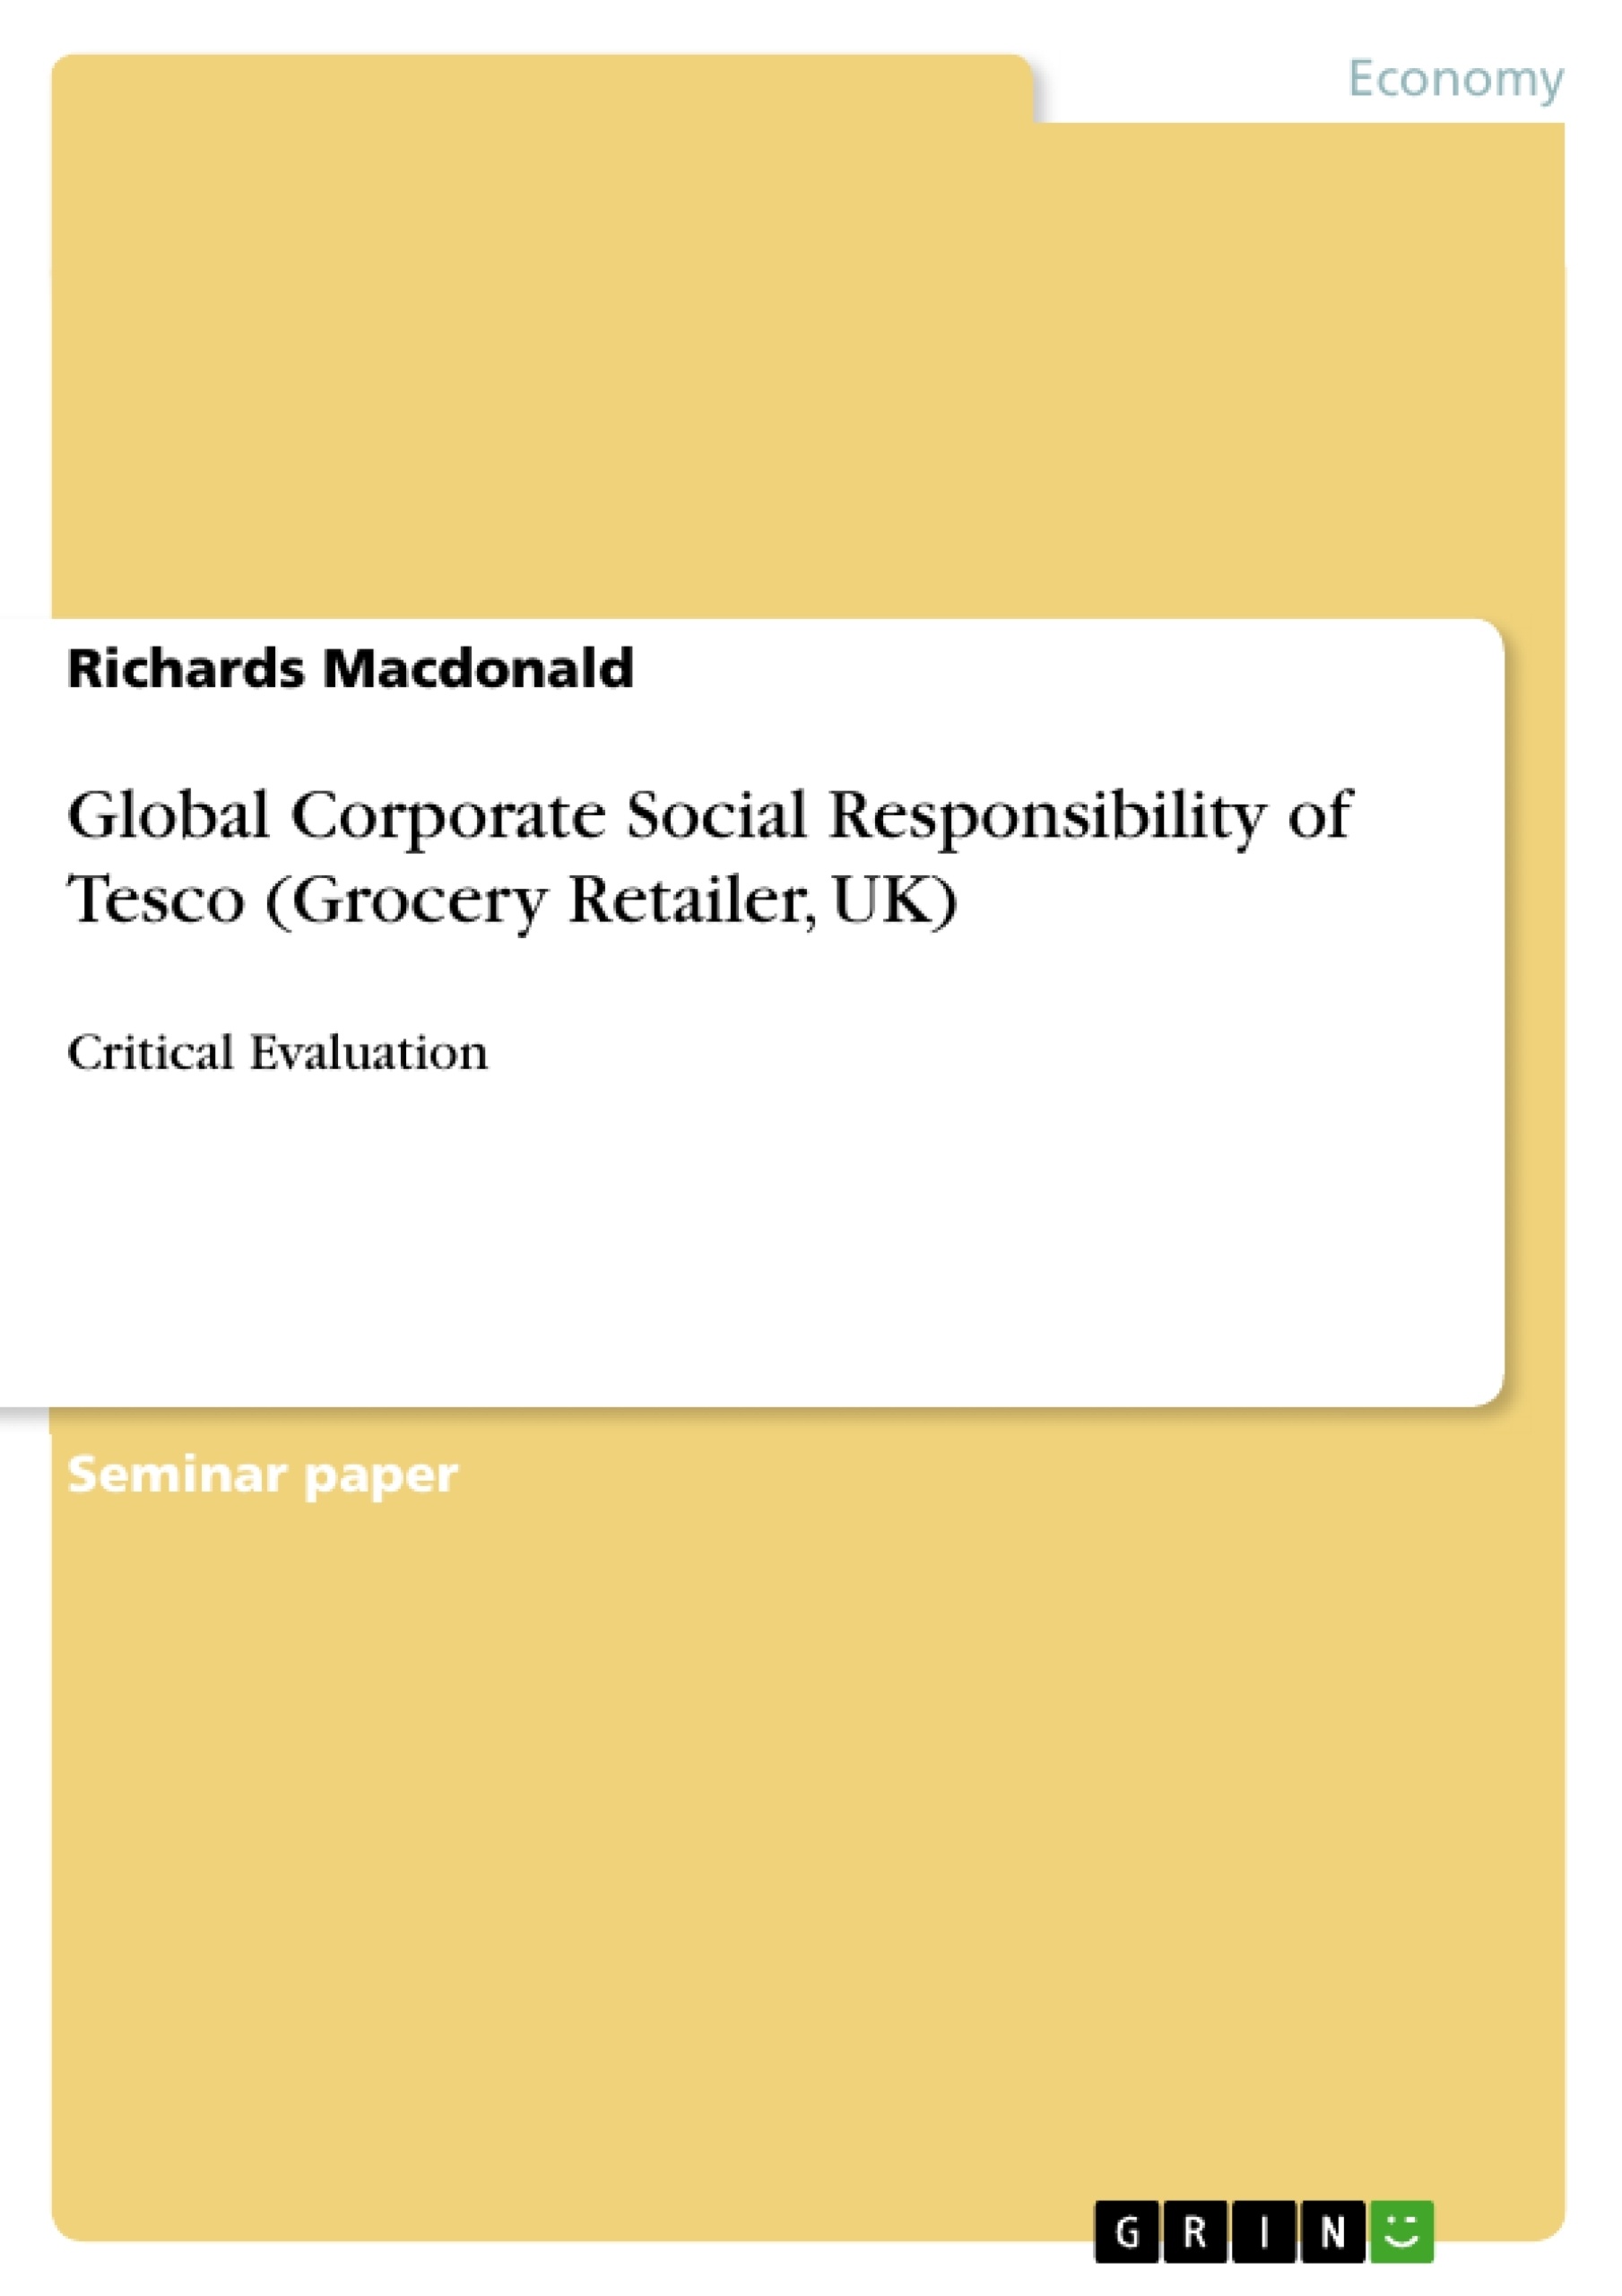 Title: Global Corporate Social Responsibility of Tesco (Grocery Retailer, UK)